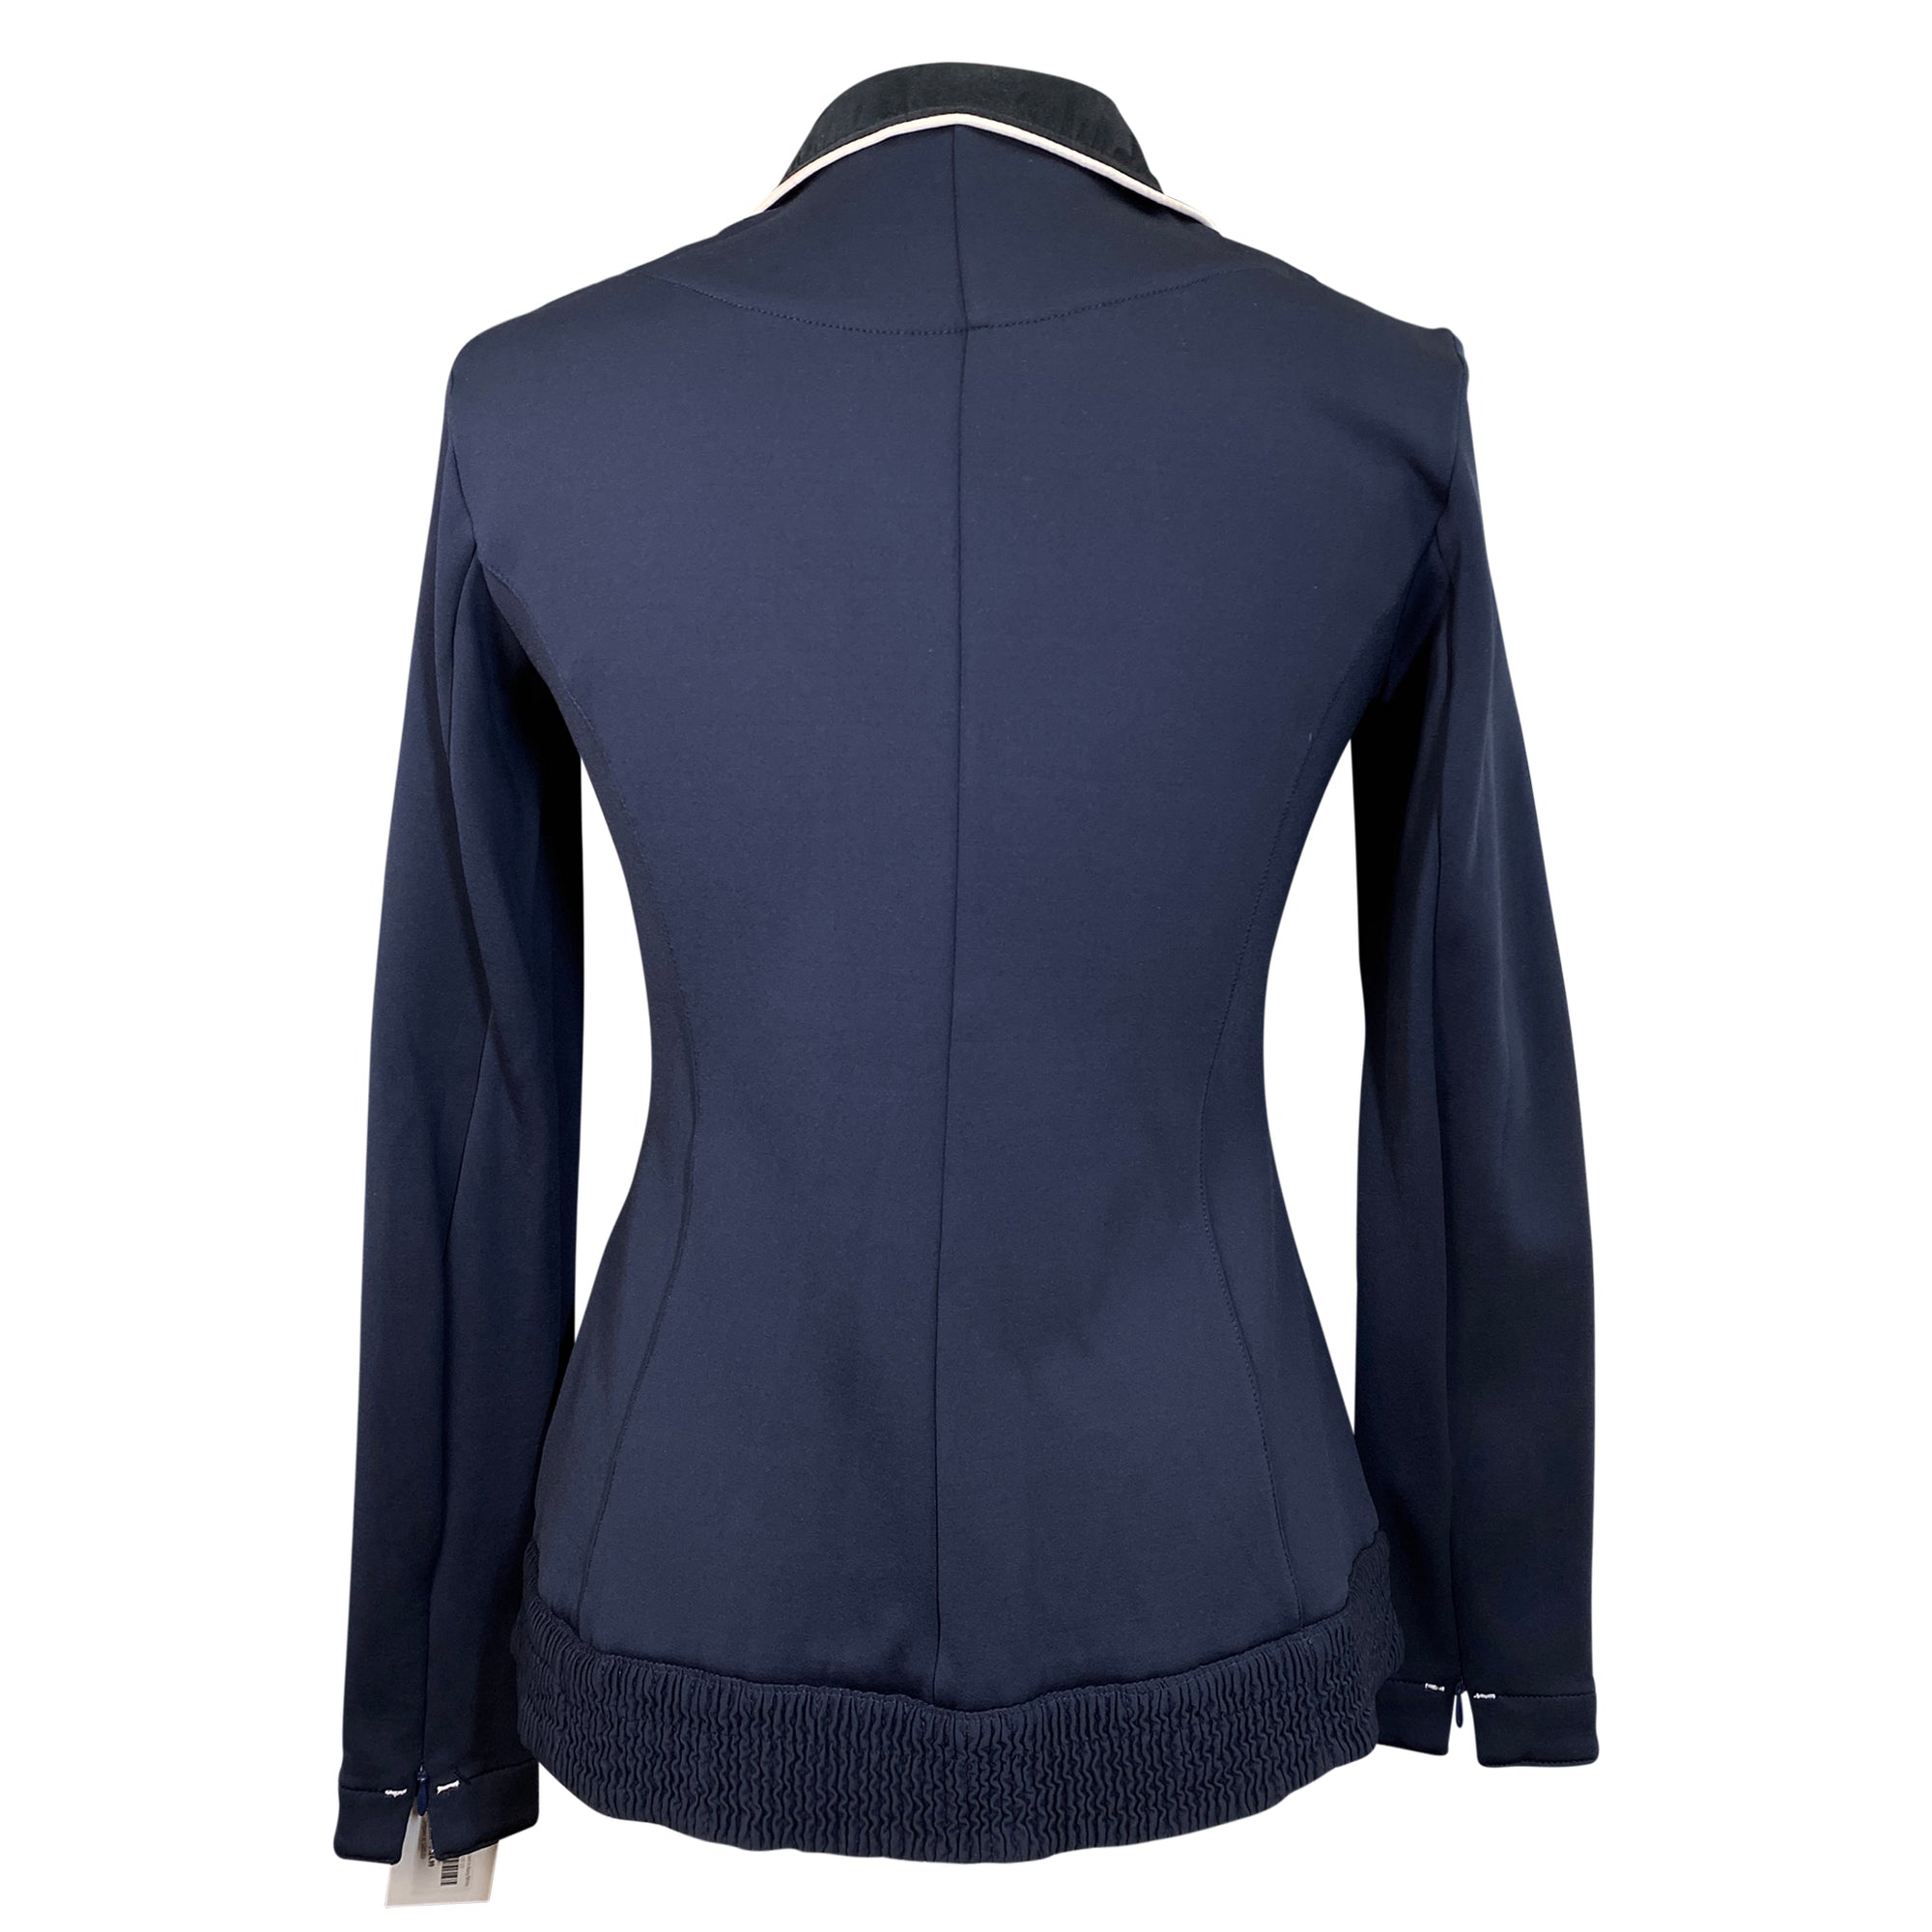 Animo Competition Jacket in Navy/White Piping